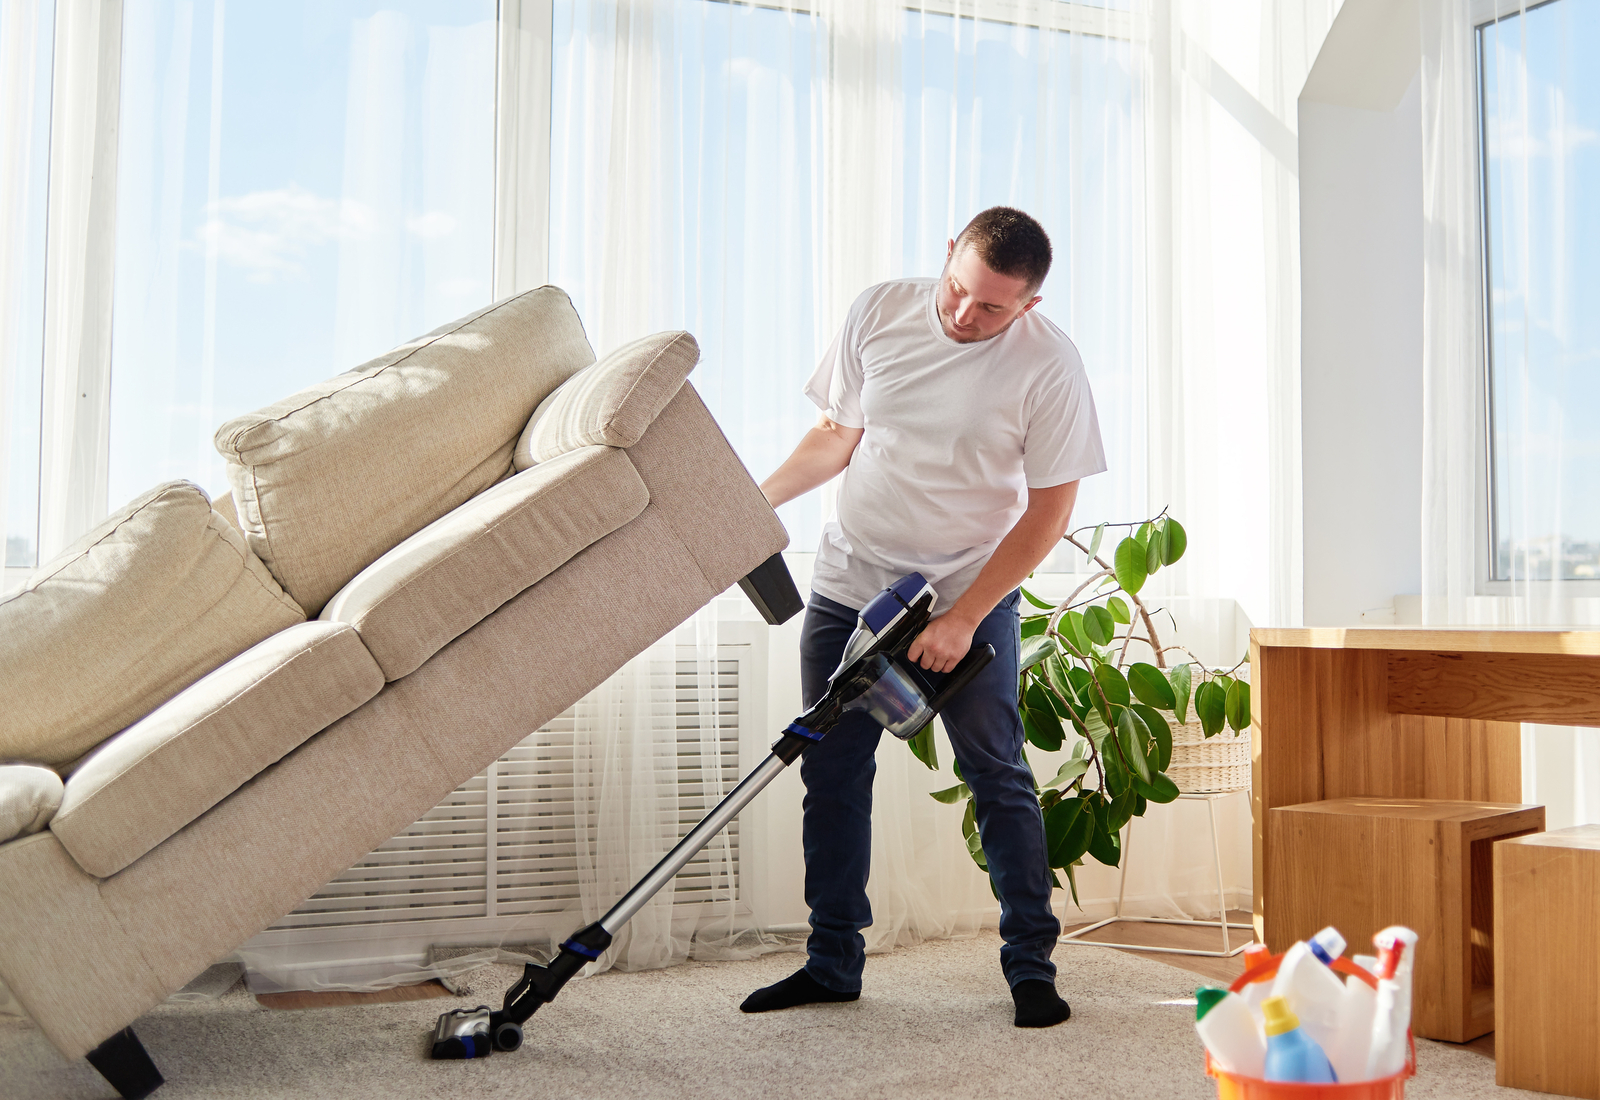 15 tips from Israelis on how to spring clean your home - ISRAEL21c